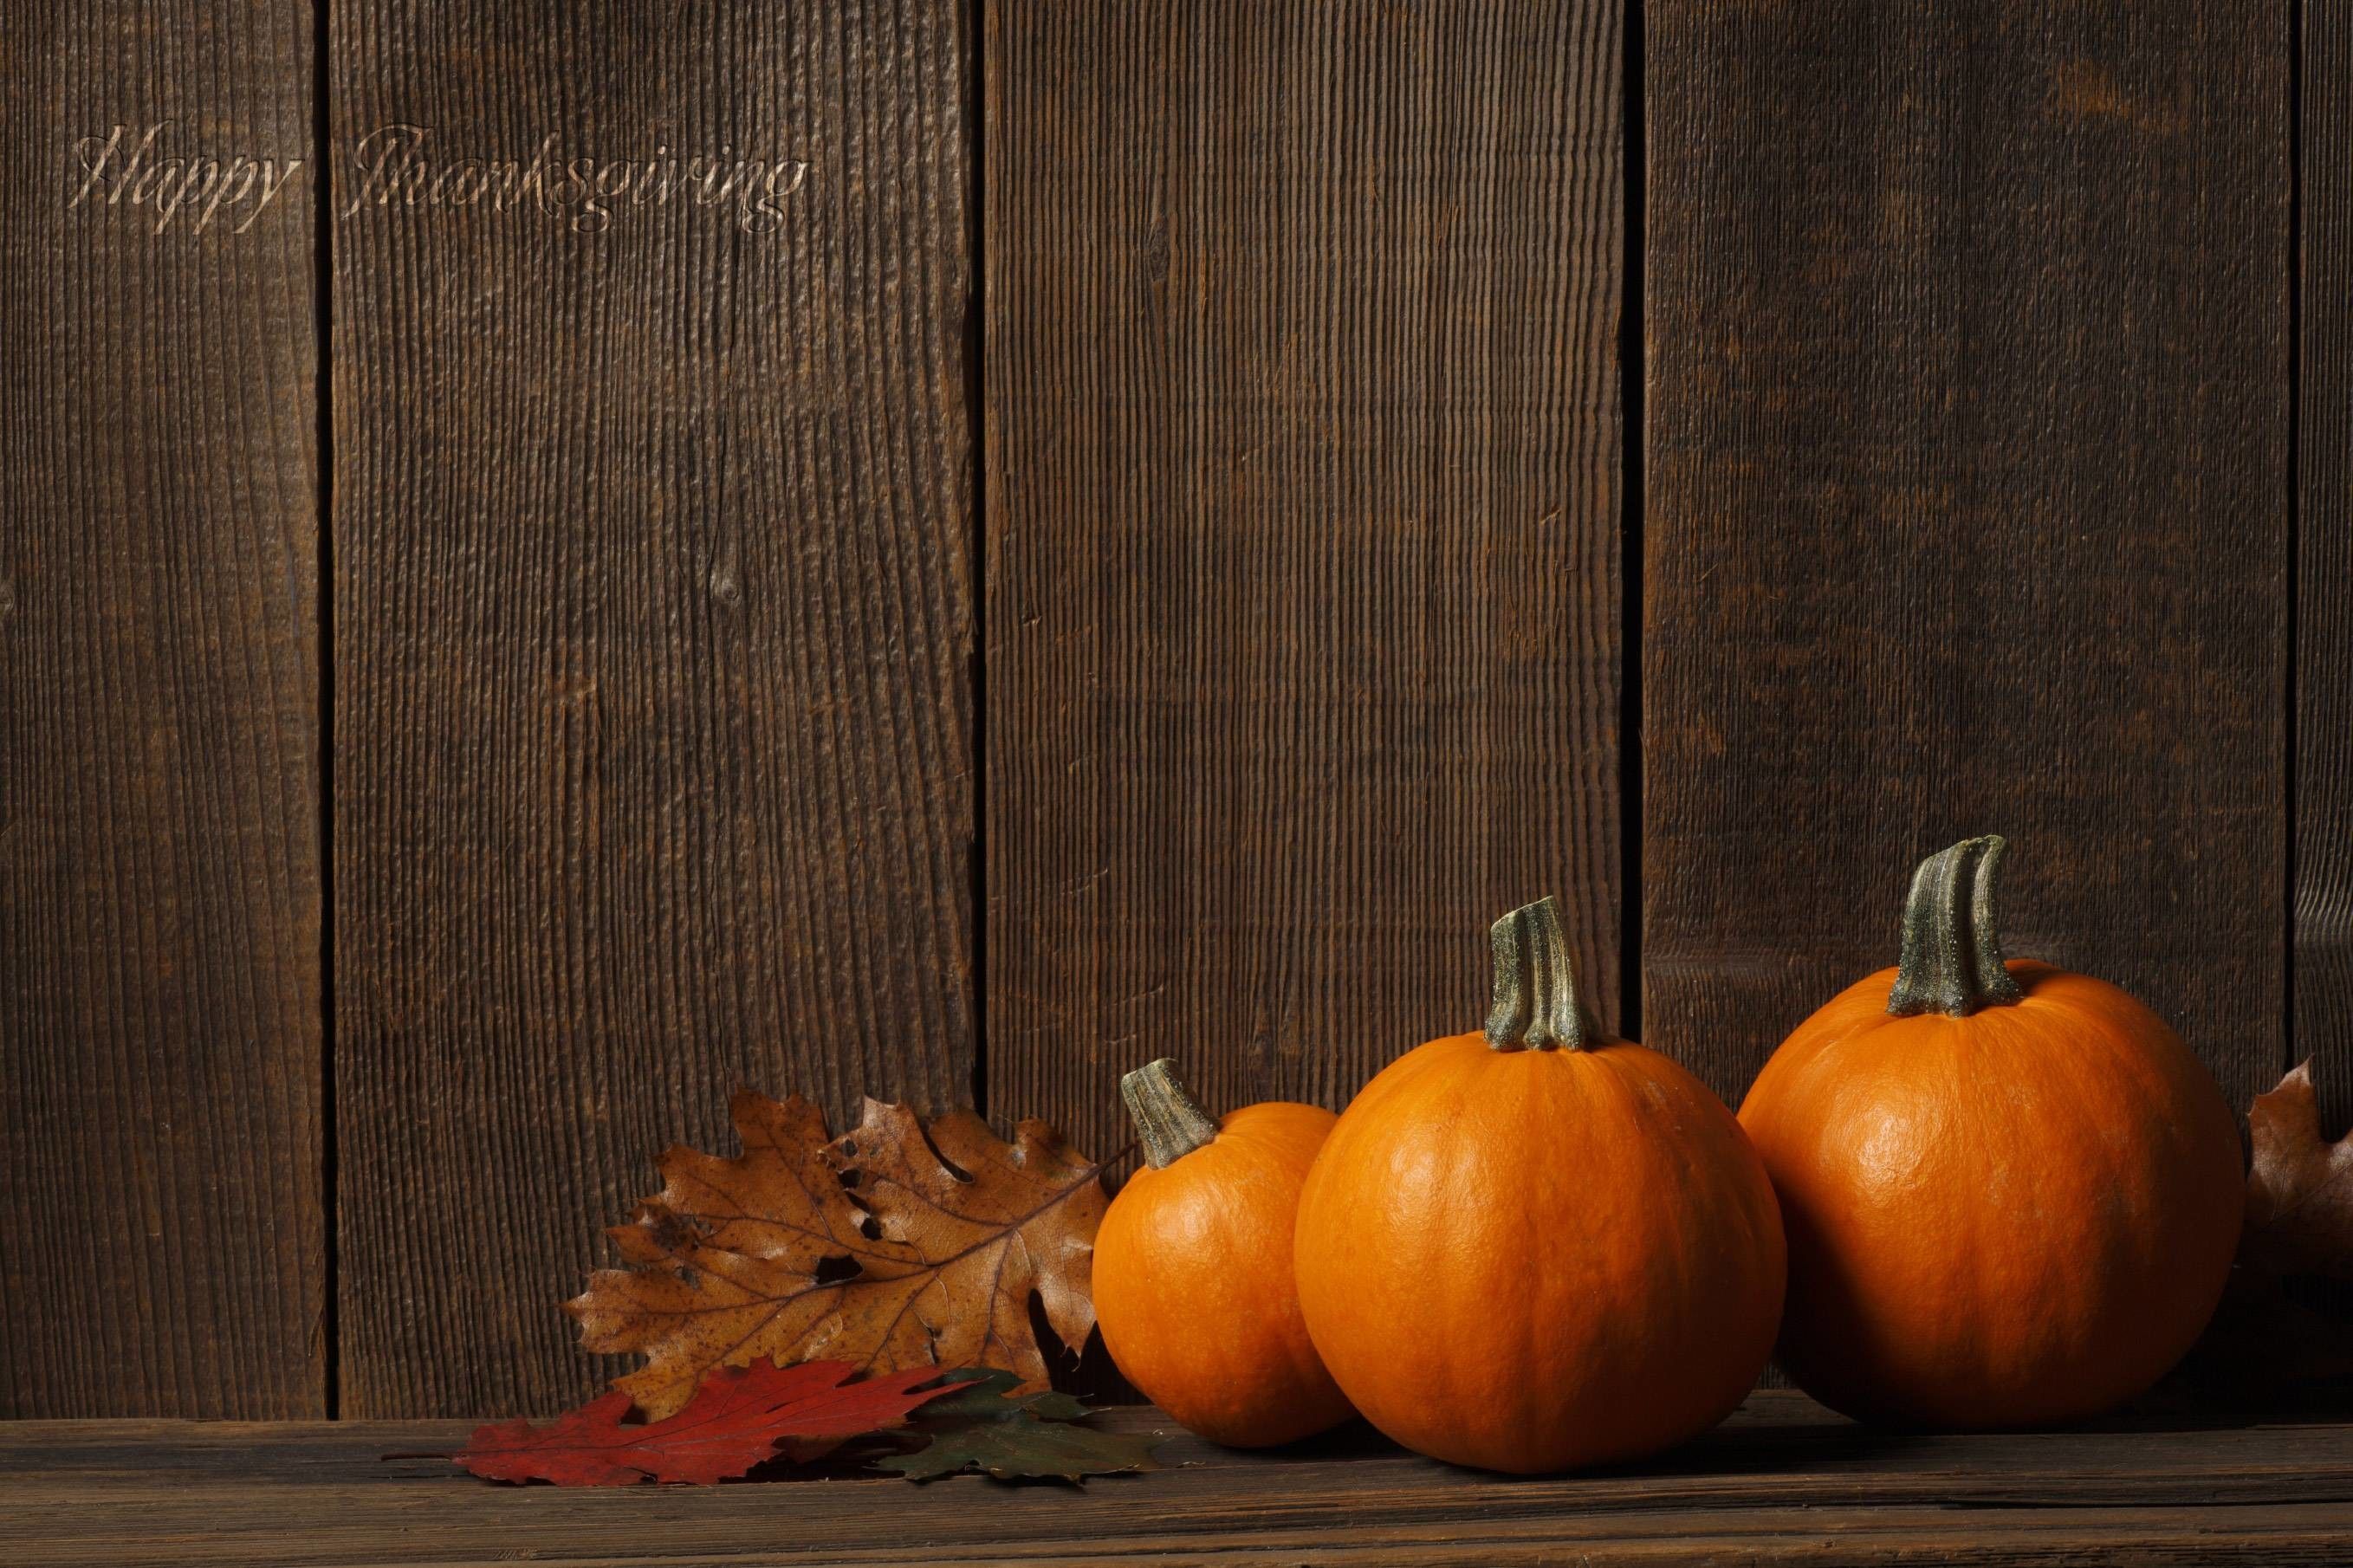 A few pumpkins and leaves on a wooden table. - Thanksgiving